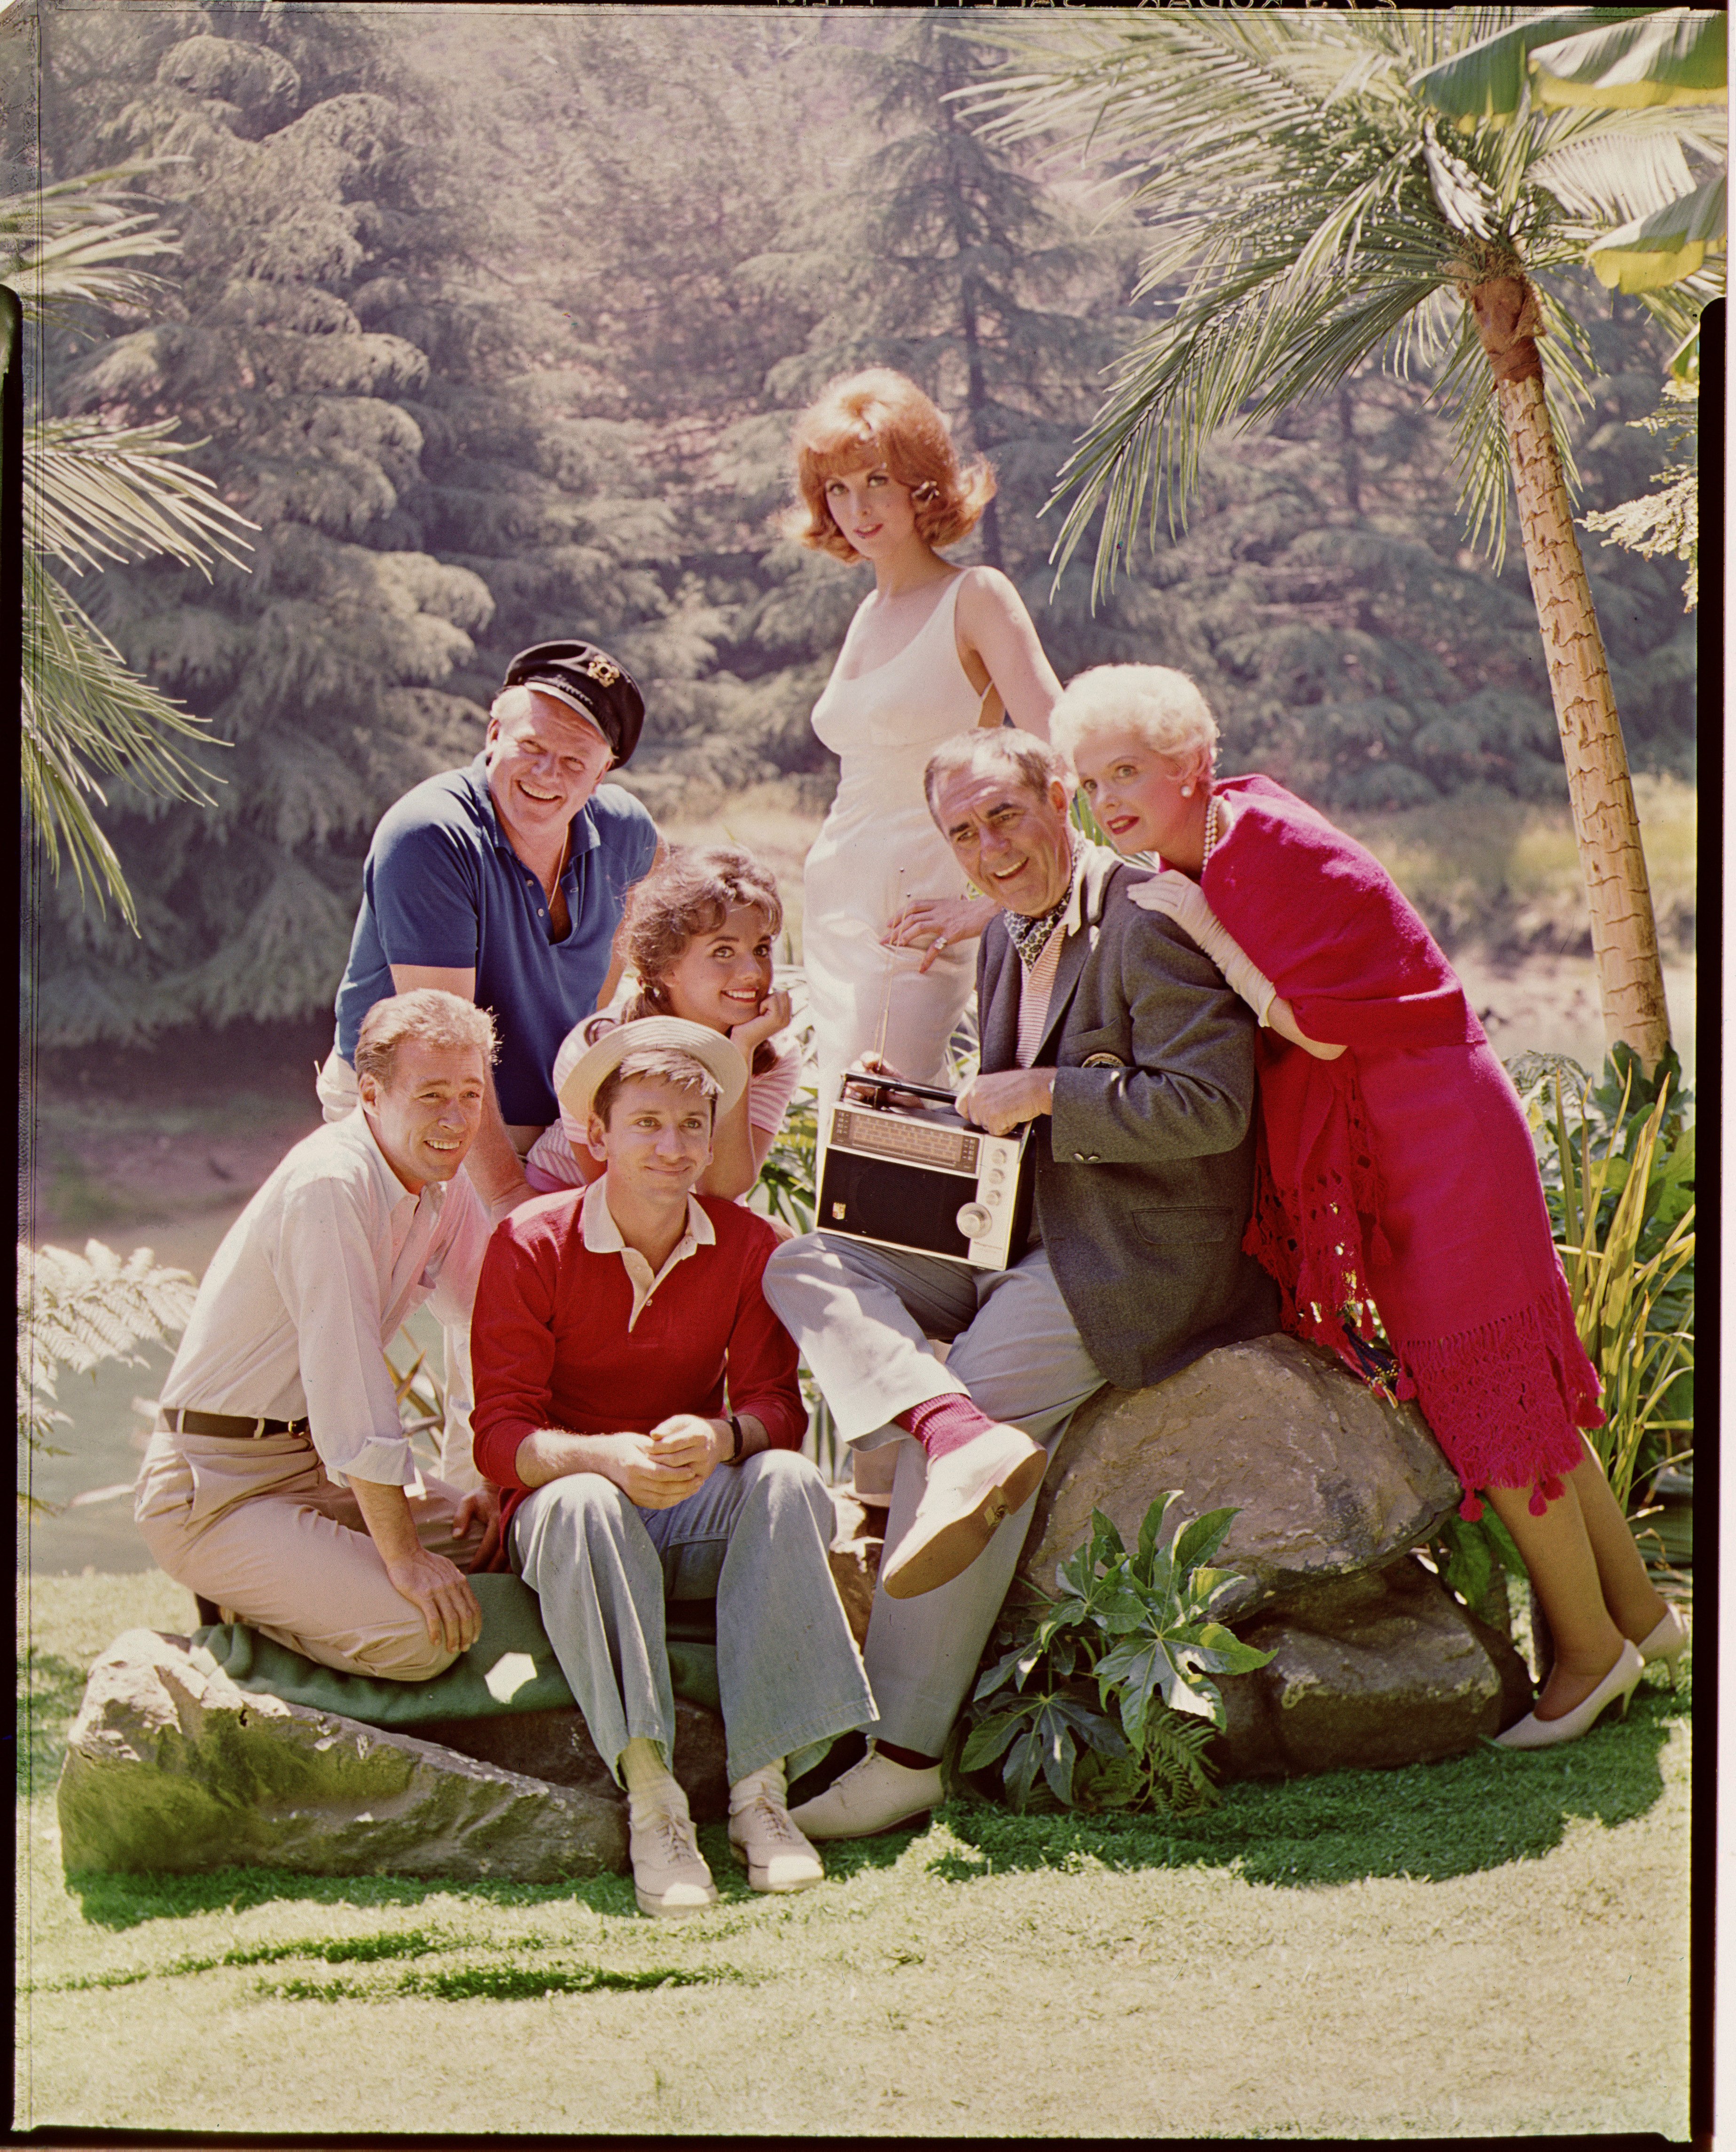 A promotional portrait of the cast of "Gilligan's Island" in the 1960s. | Source: Getty Images